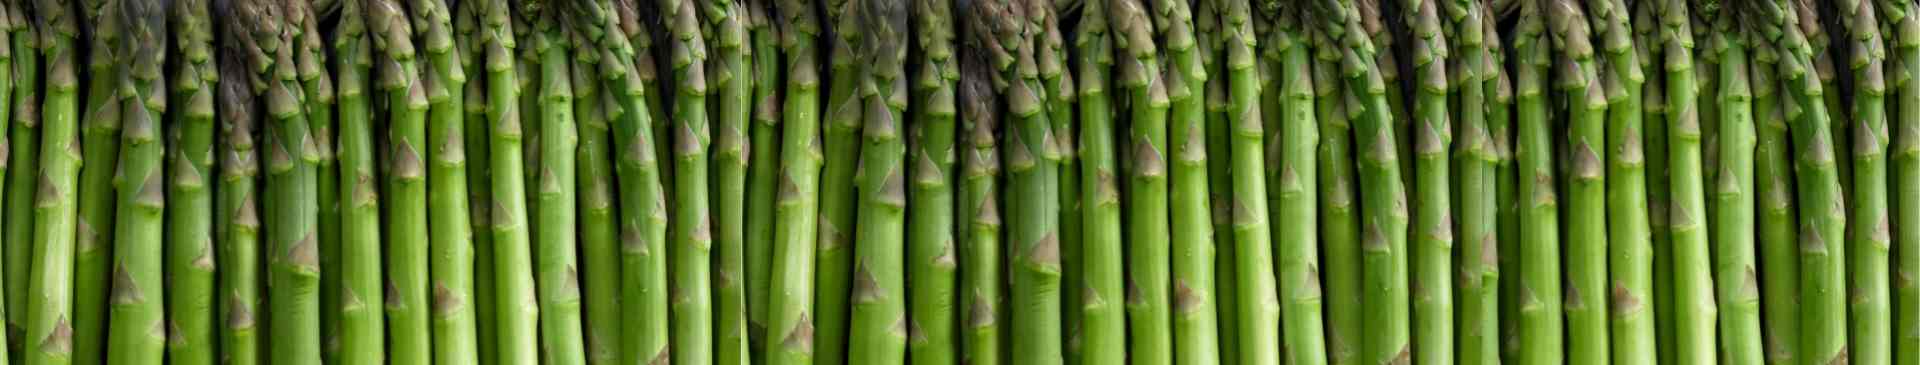 How to Grow Asparagus from Seed